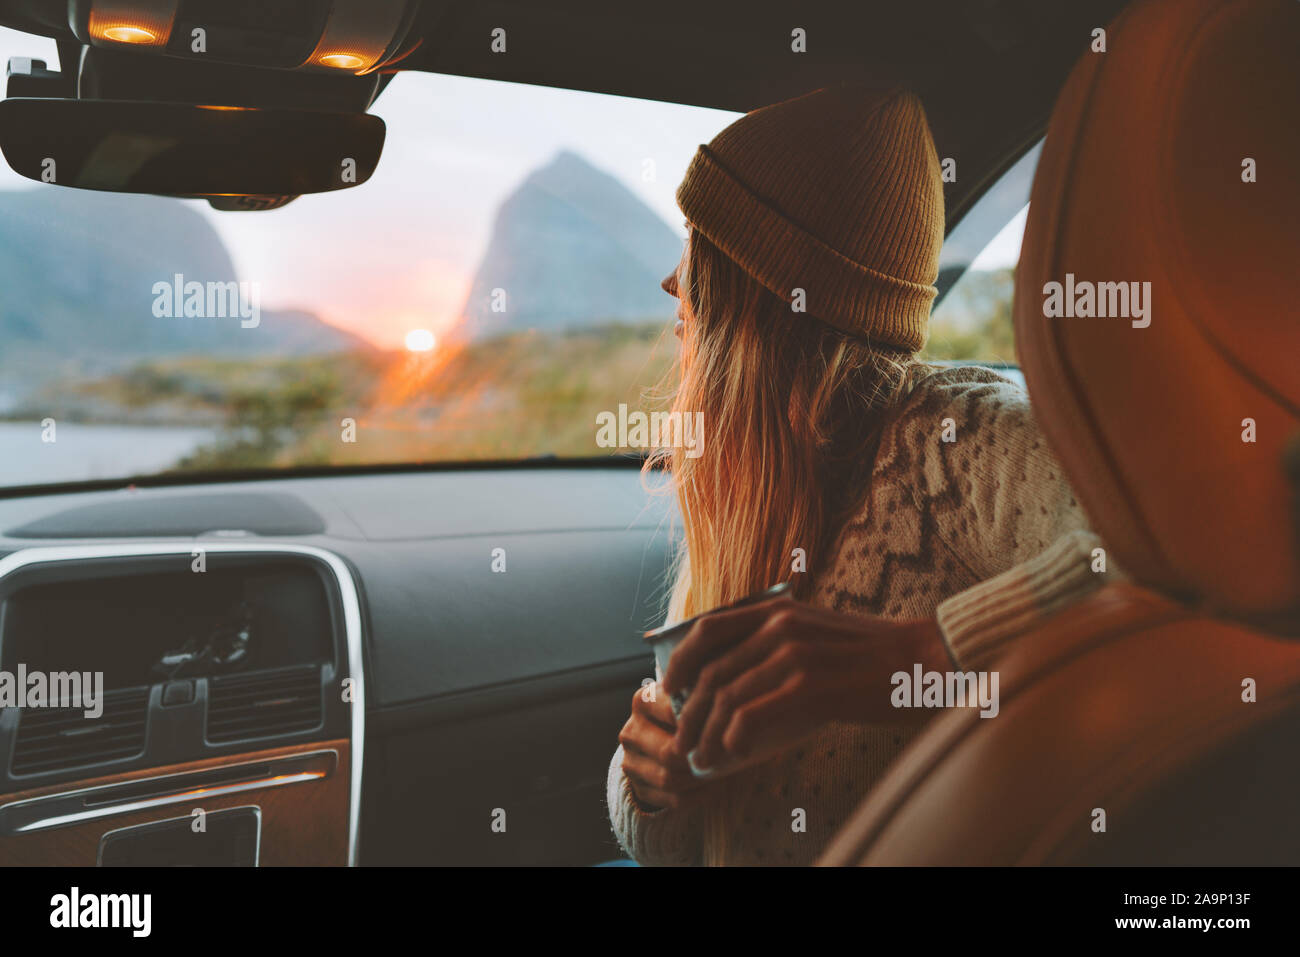 Woman on road trip traveling by rental car relaxing with coffee cup adventure lifestyle vacations vibes outdoor sunset Norway mountains view in window Stock Photo